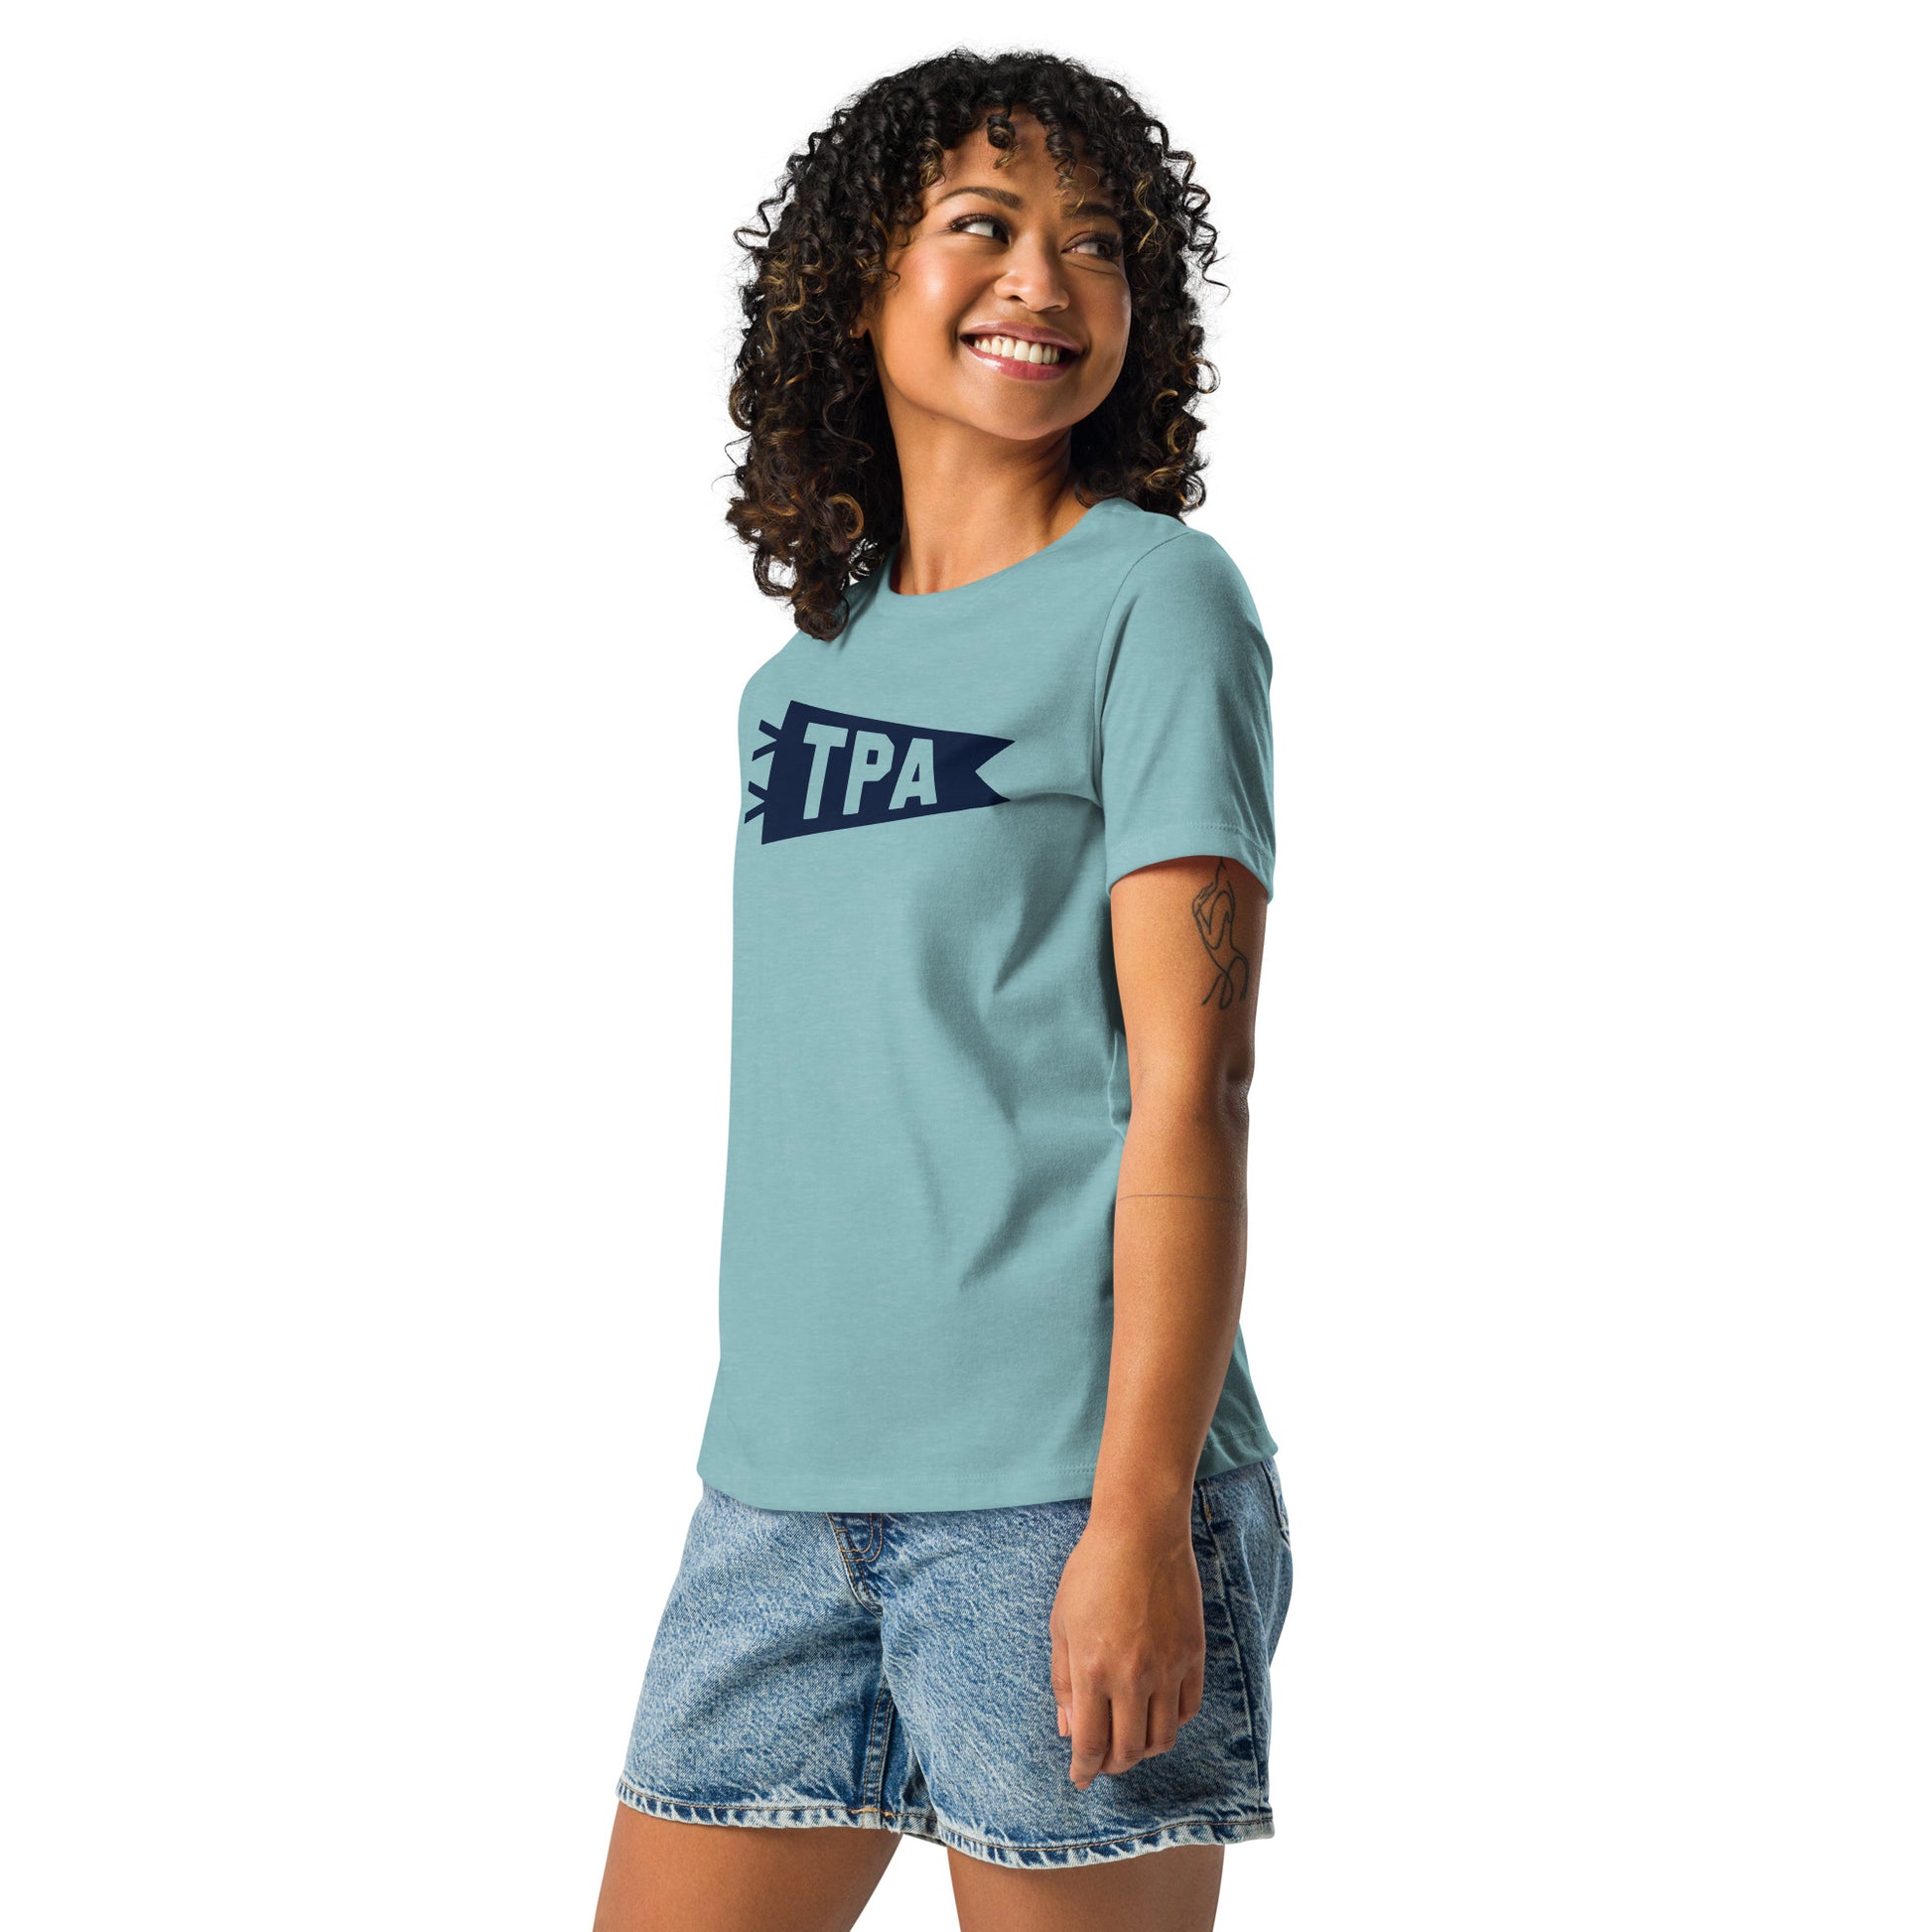 Airport Code Women's Tee - Navy Blue Graphic • TPA Tampa • YHM Designs - Image 06